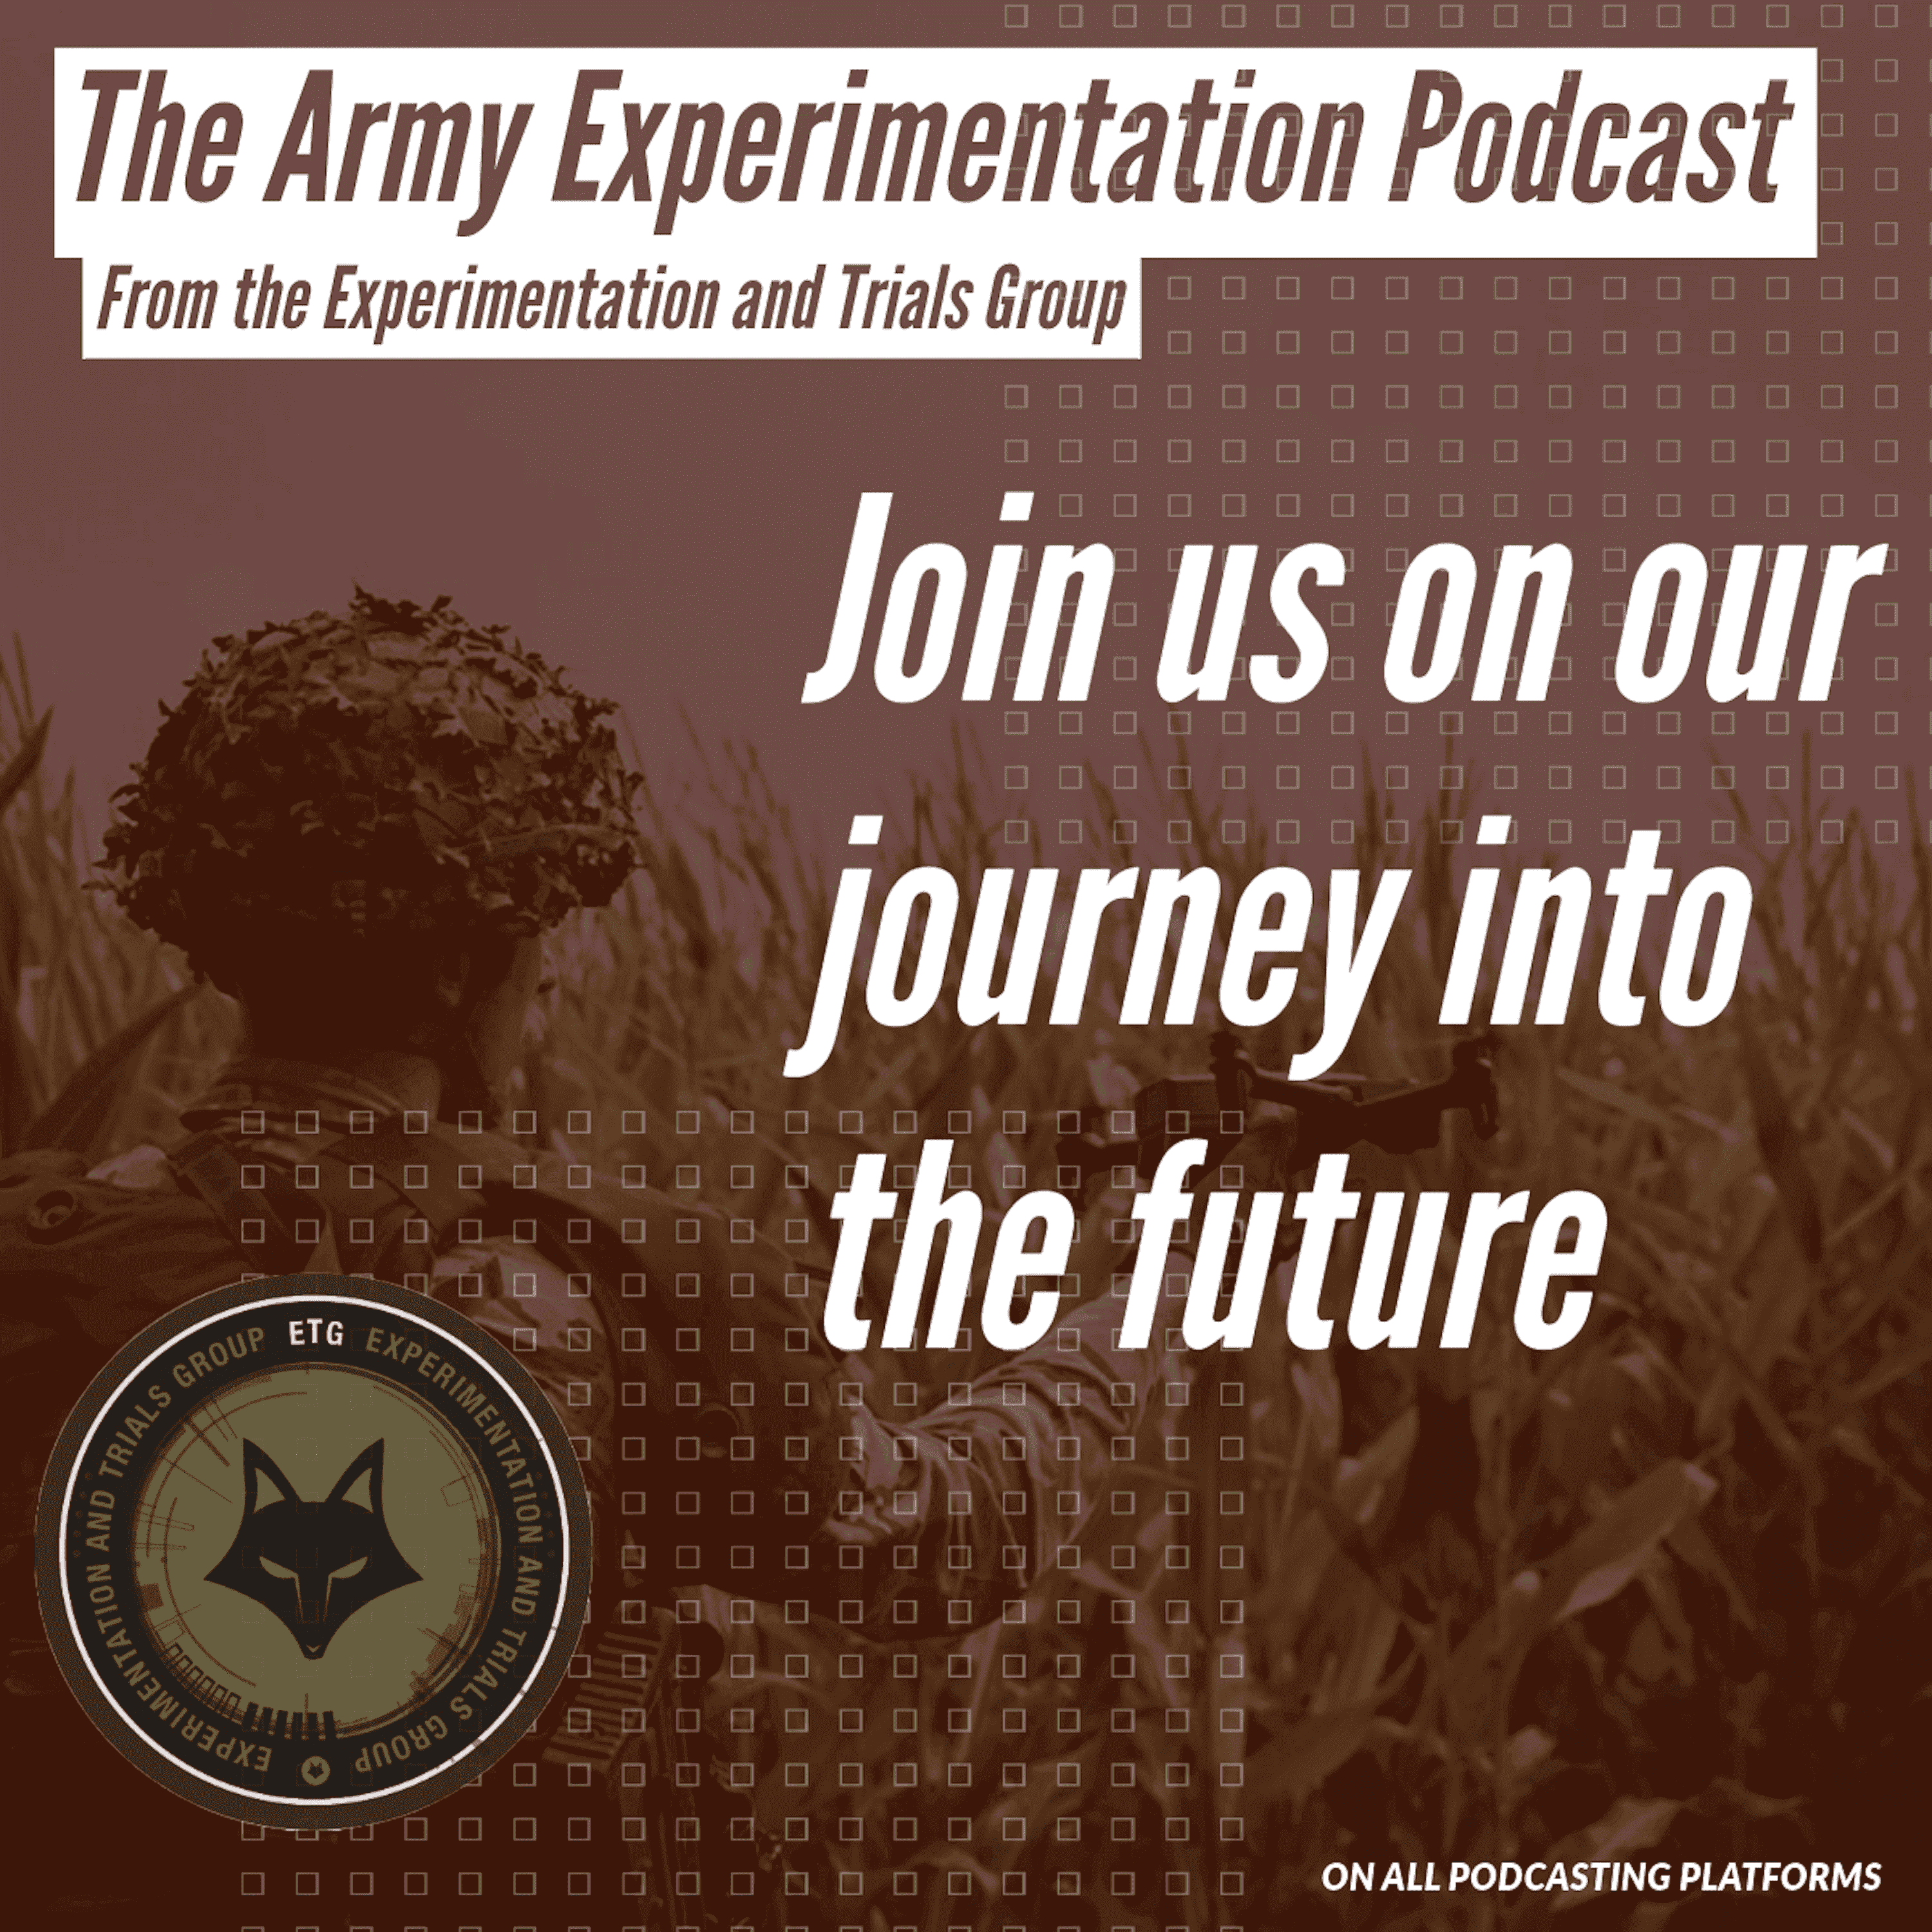 The Army Experimentation Podcast